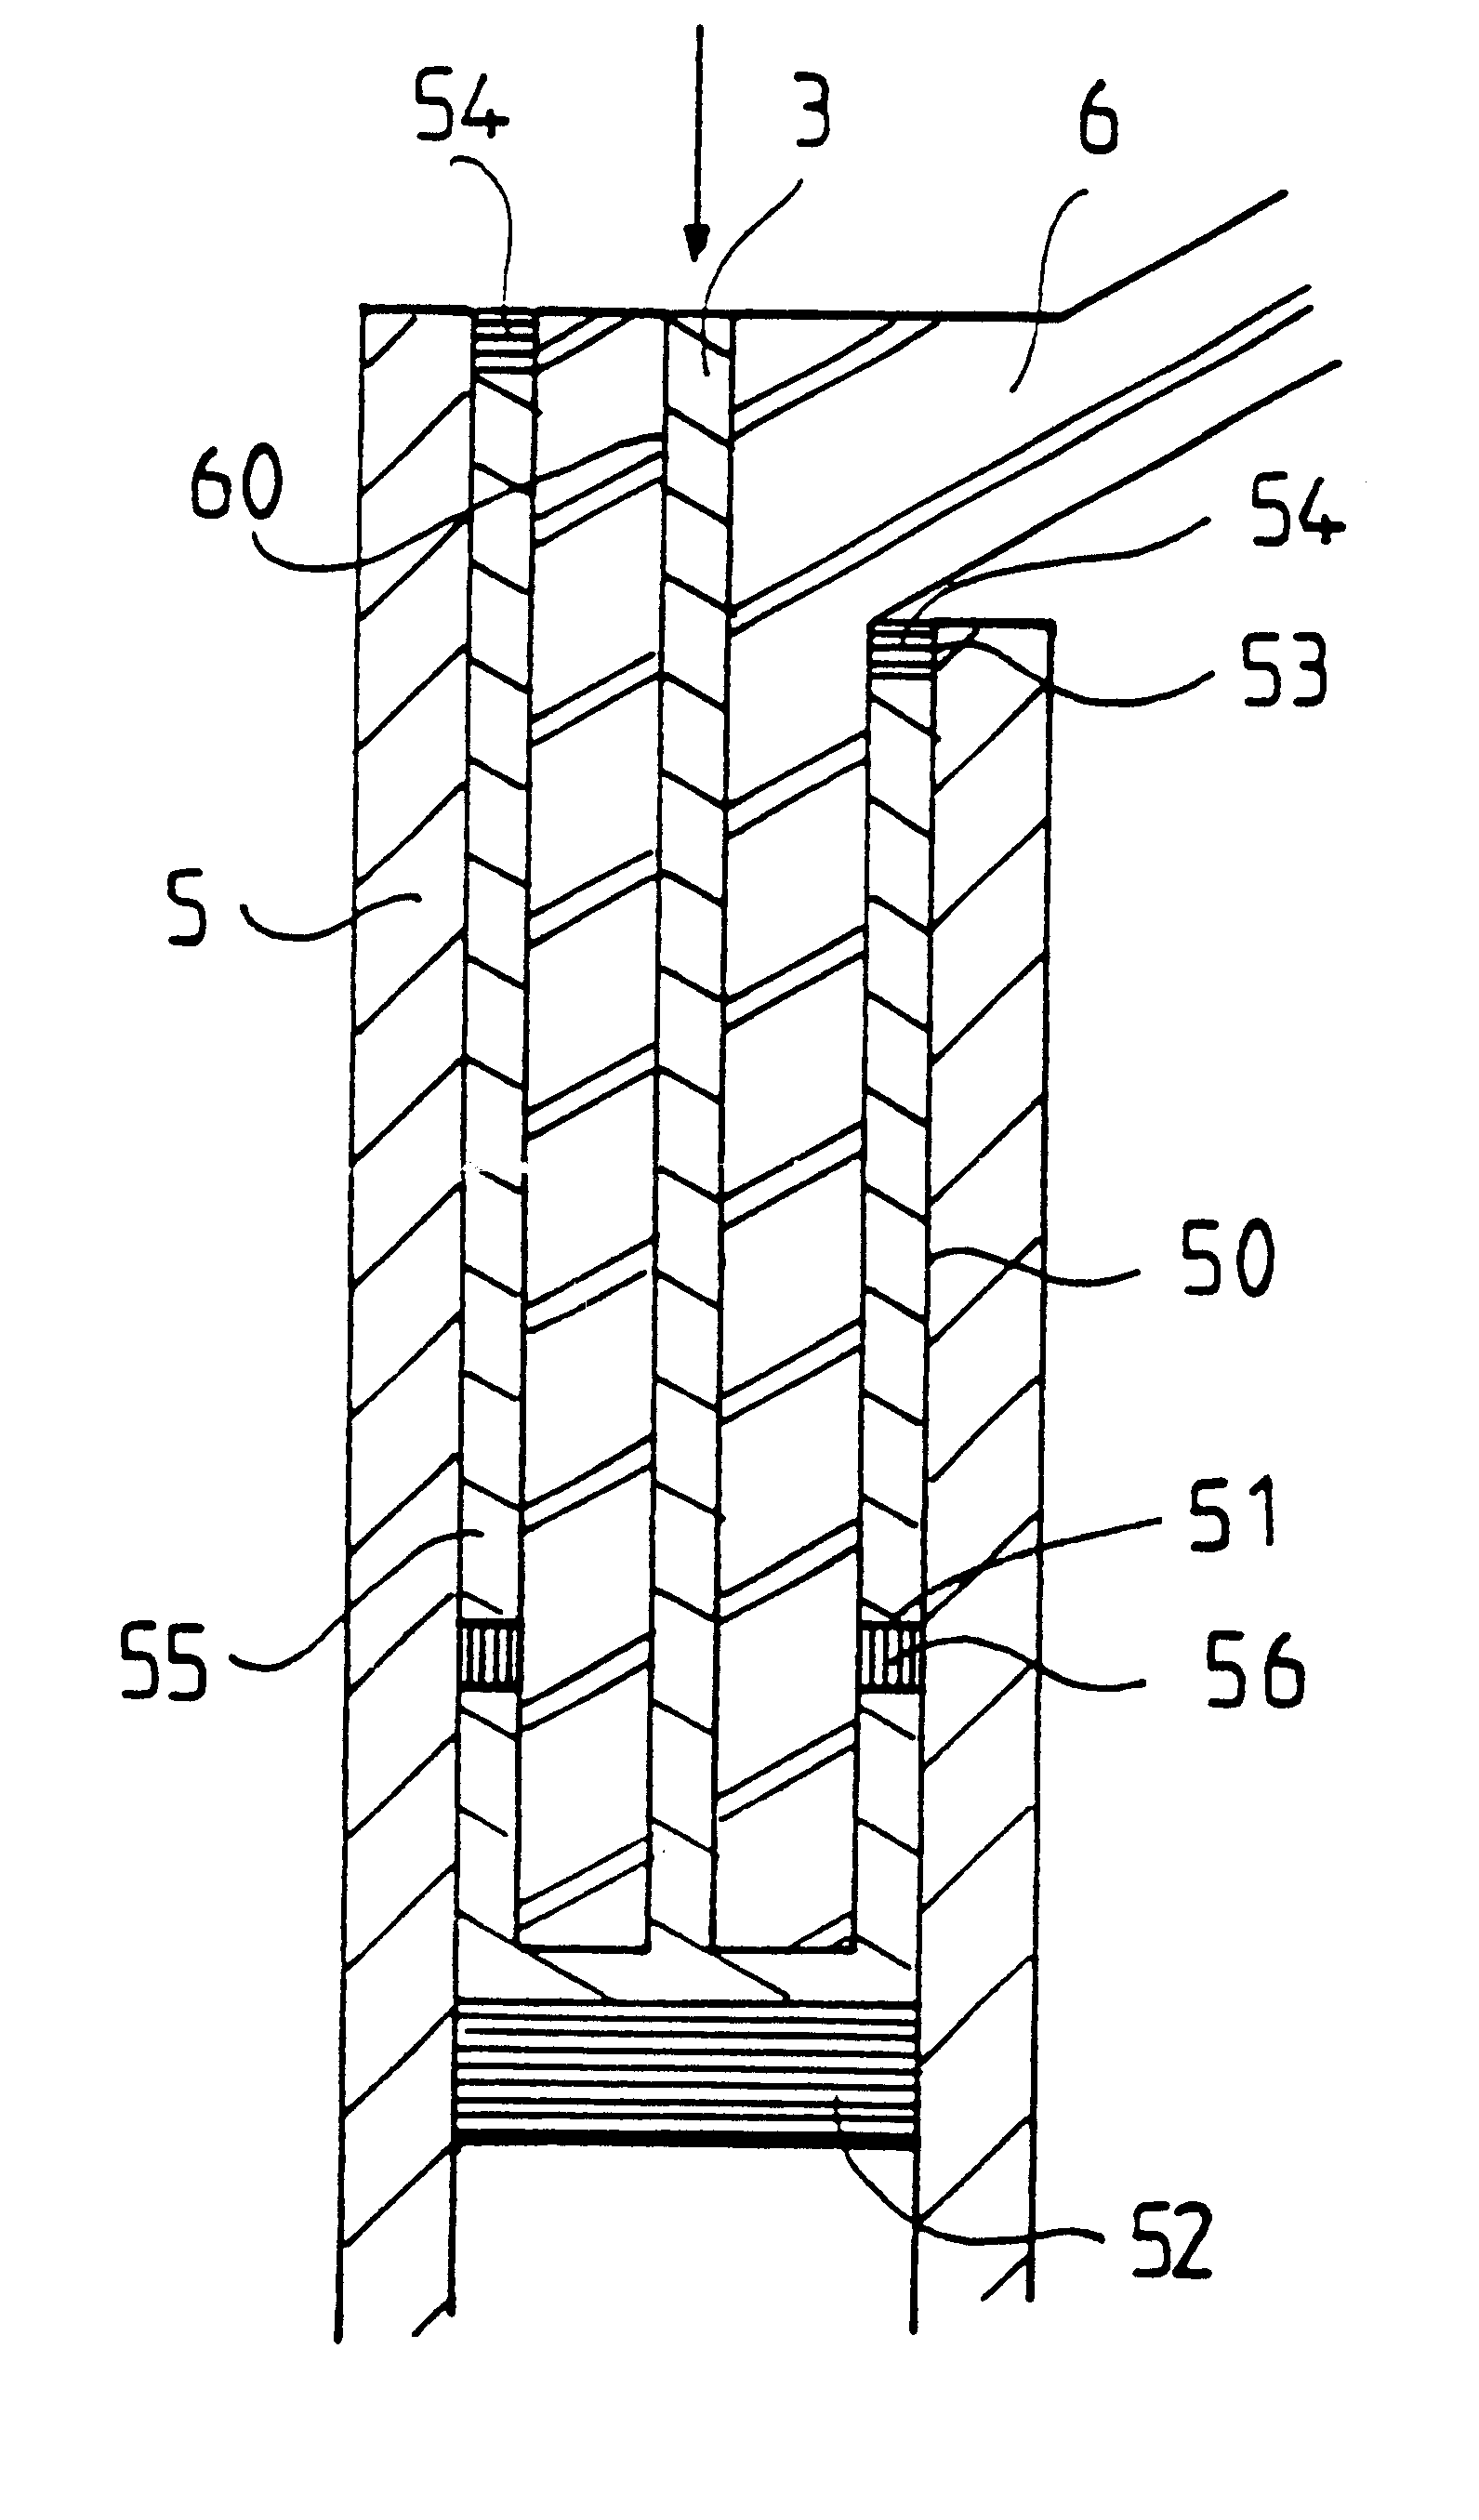 Grouting method for rigidly connecting two elements using a binder, and in particular for anchoring one element in another